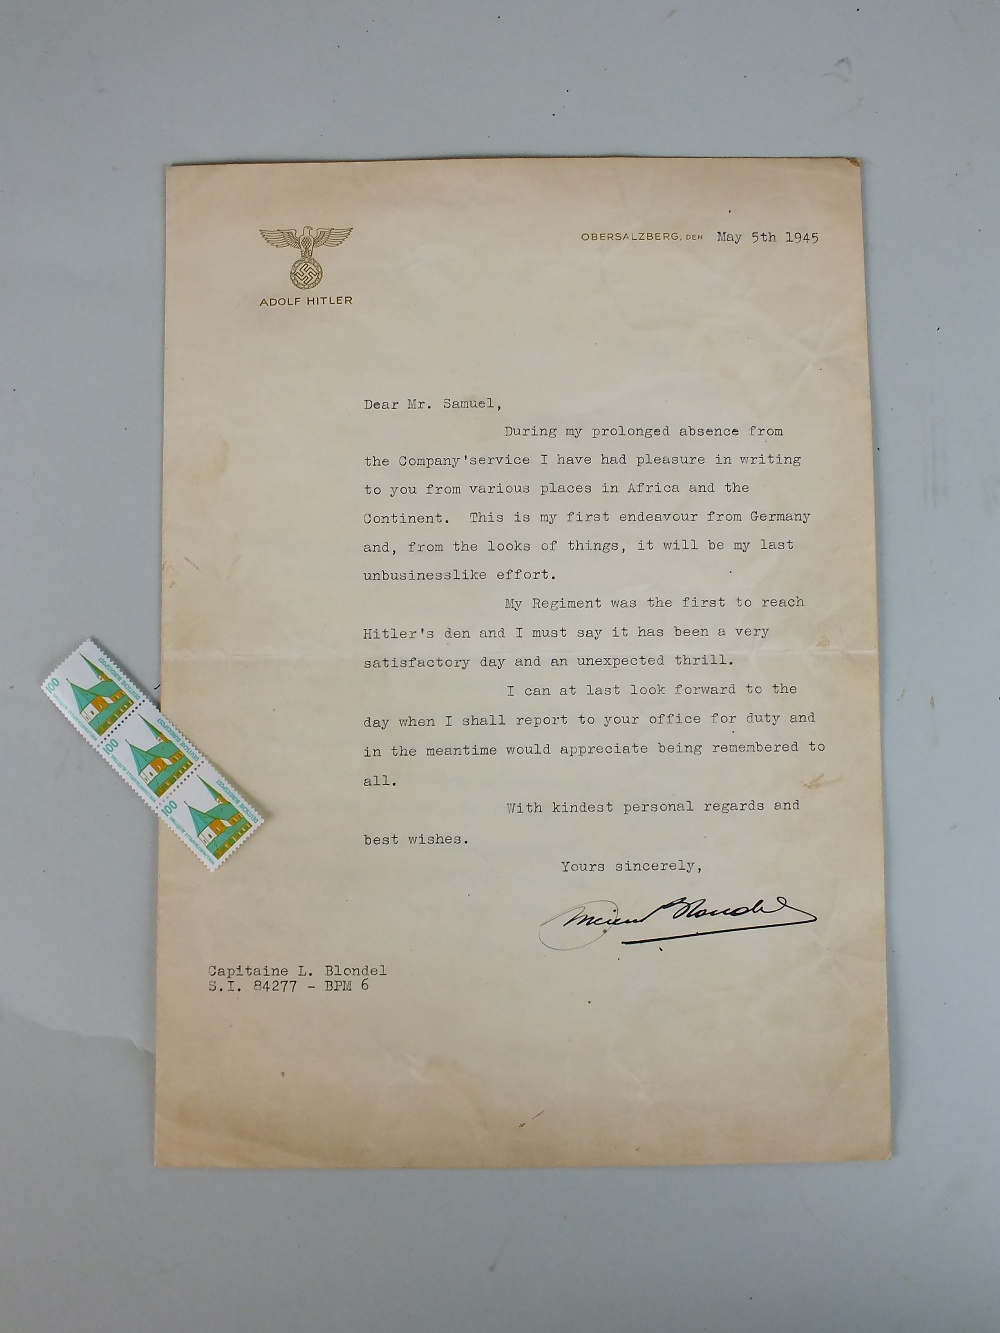 An unusual letter on captured personal Adolf Hitler headed notepaper, 'Obersalzberg' den May 5th,